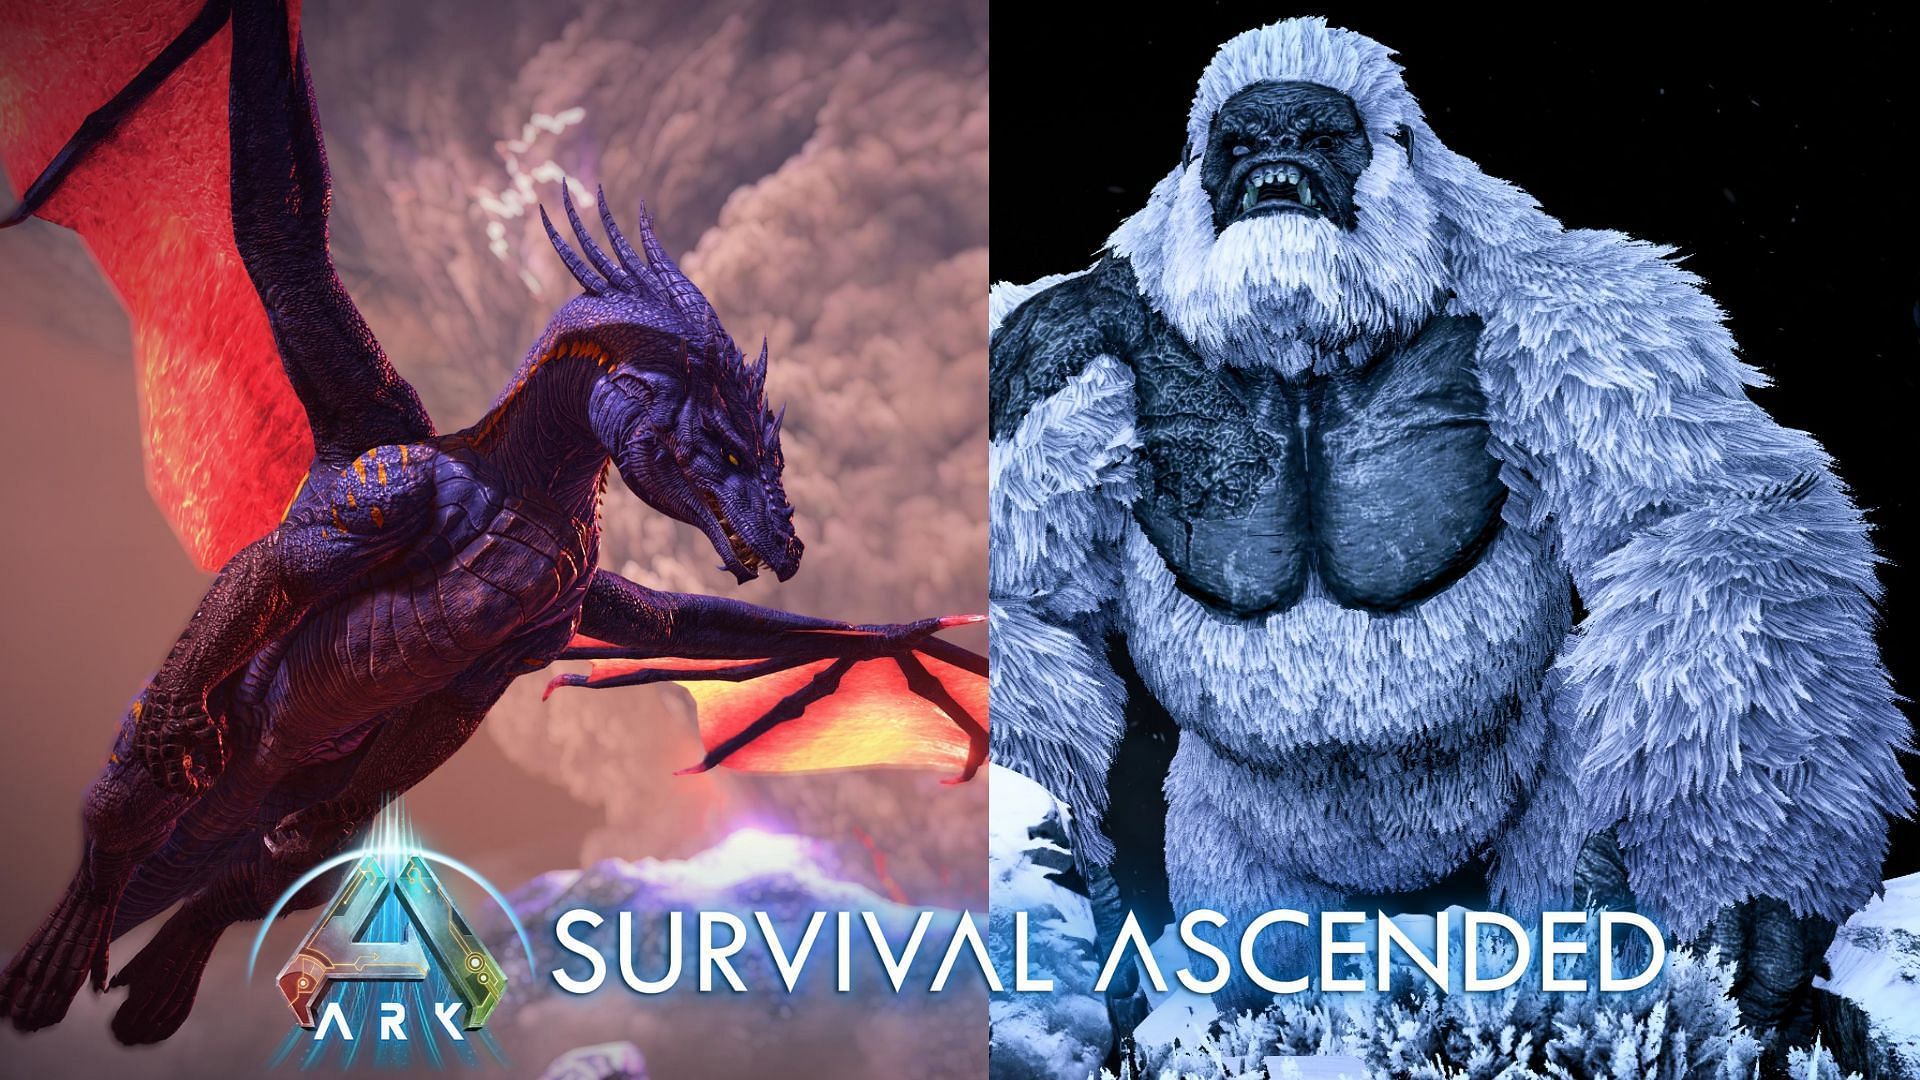 All Ark Survival Ascended Boss Fights Ranked